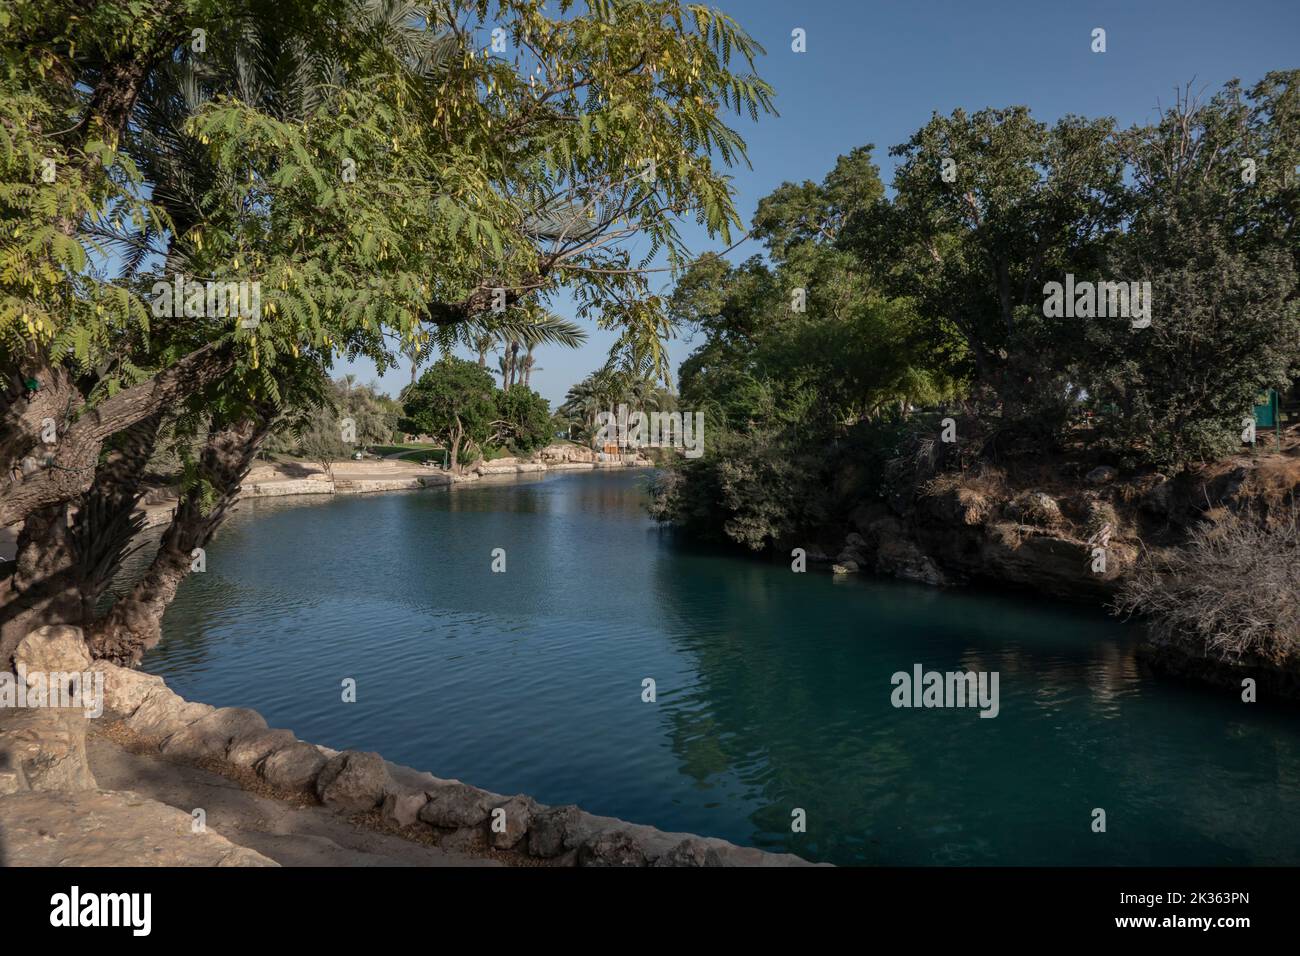 View of a natural spring water pool of Amal stream which crosses Gan HaShlosha National Park also known by its Arabic name Sakhne in Israel Stock Photo